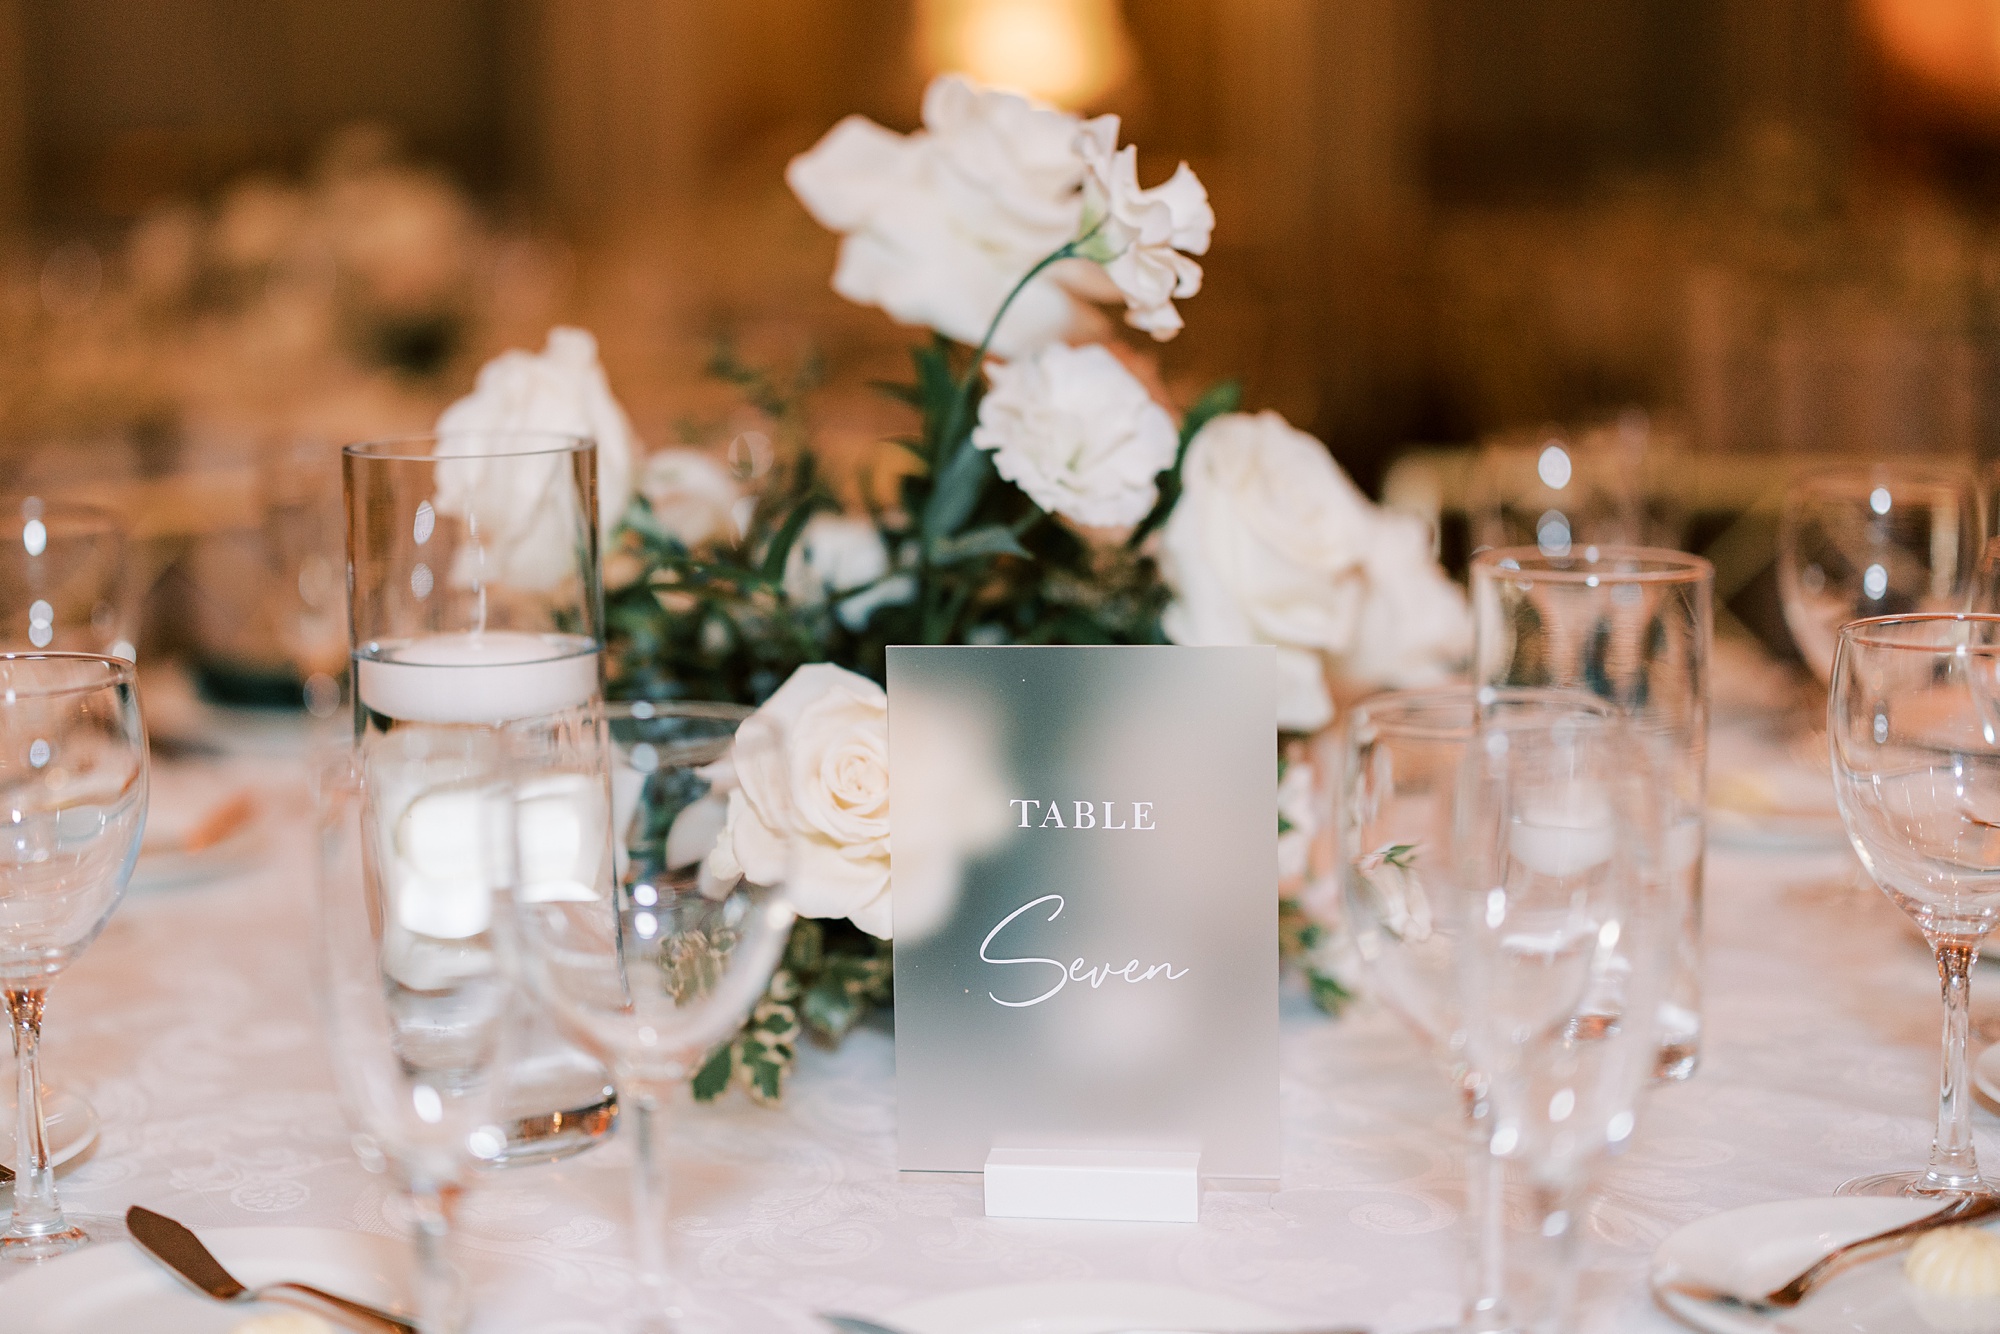 centerpieces with white flowers and acrylic table number signs